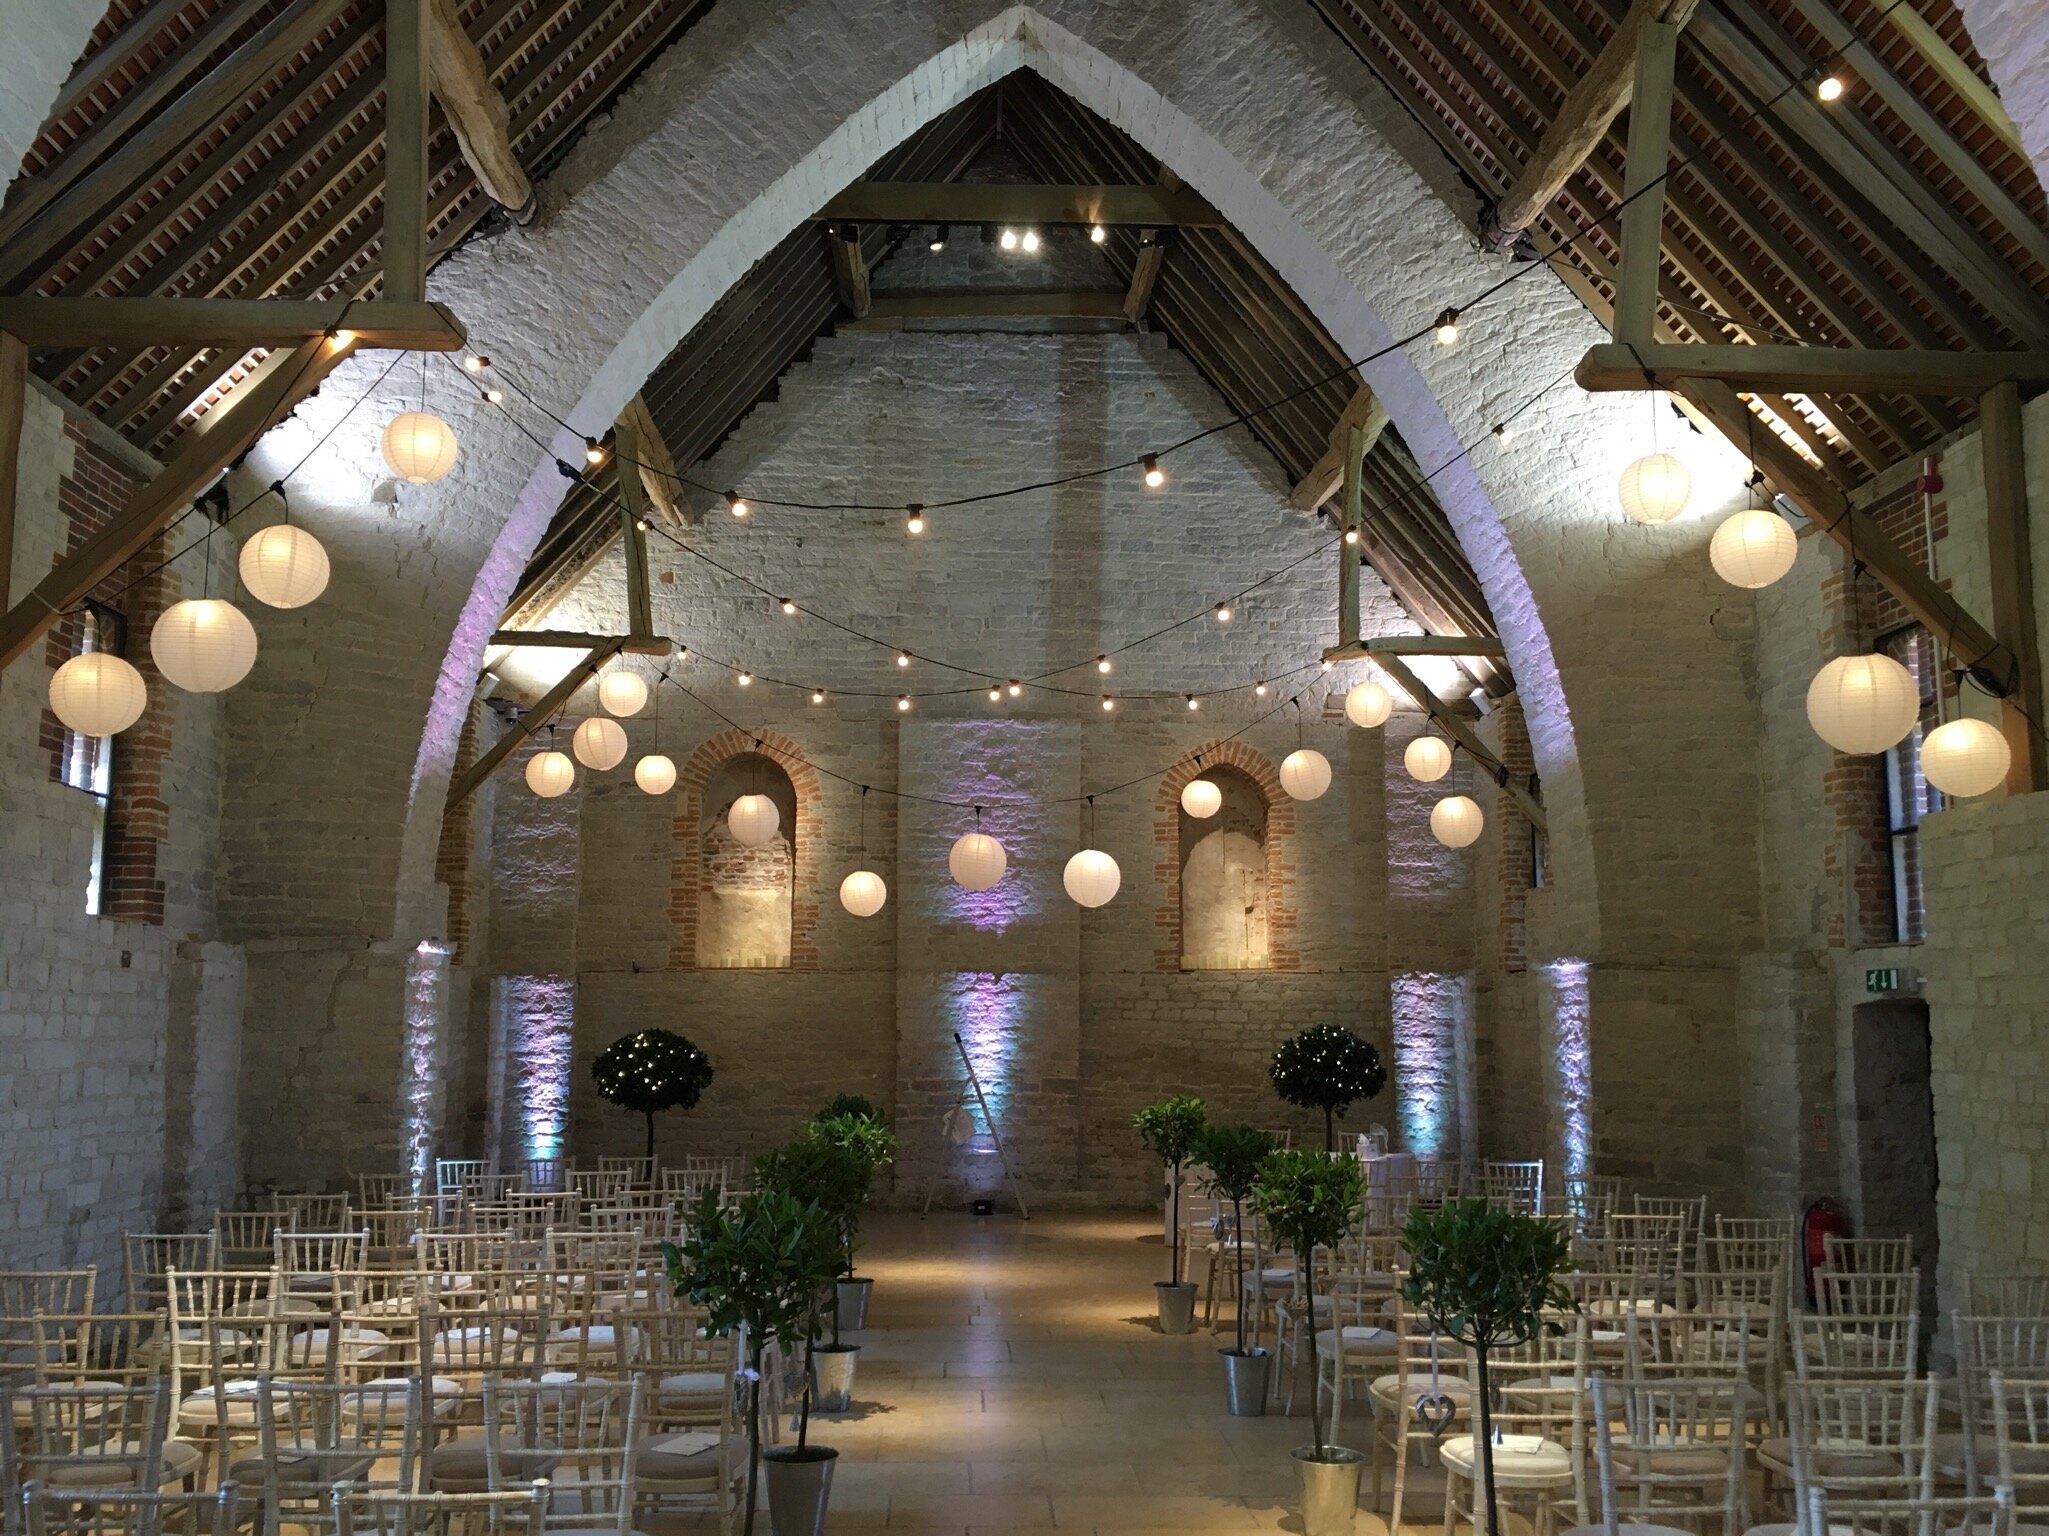 festoon lights and pendants with hanging lanterns at tithe barn petersfield